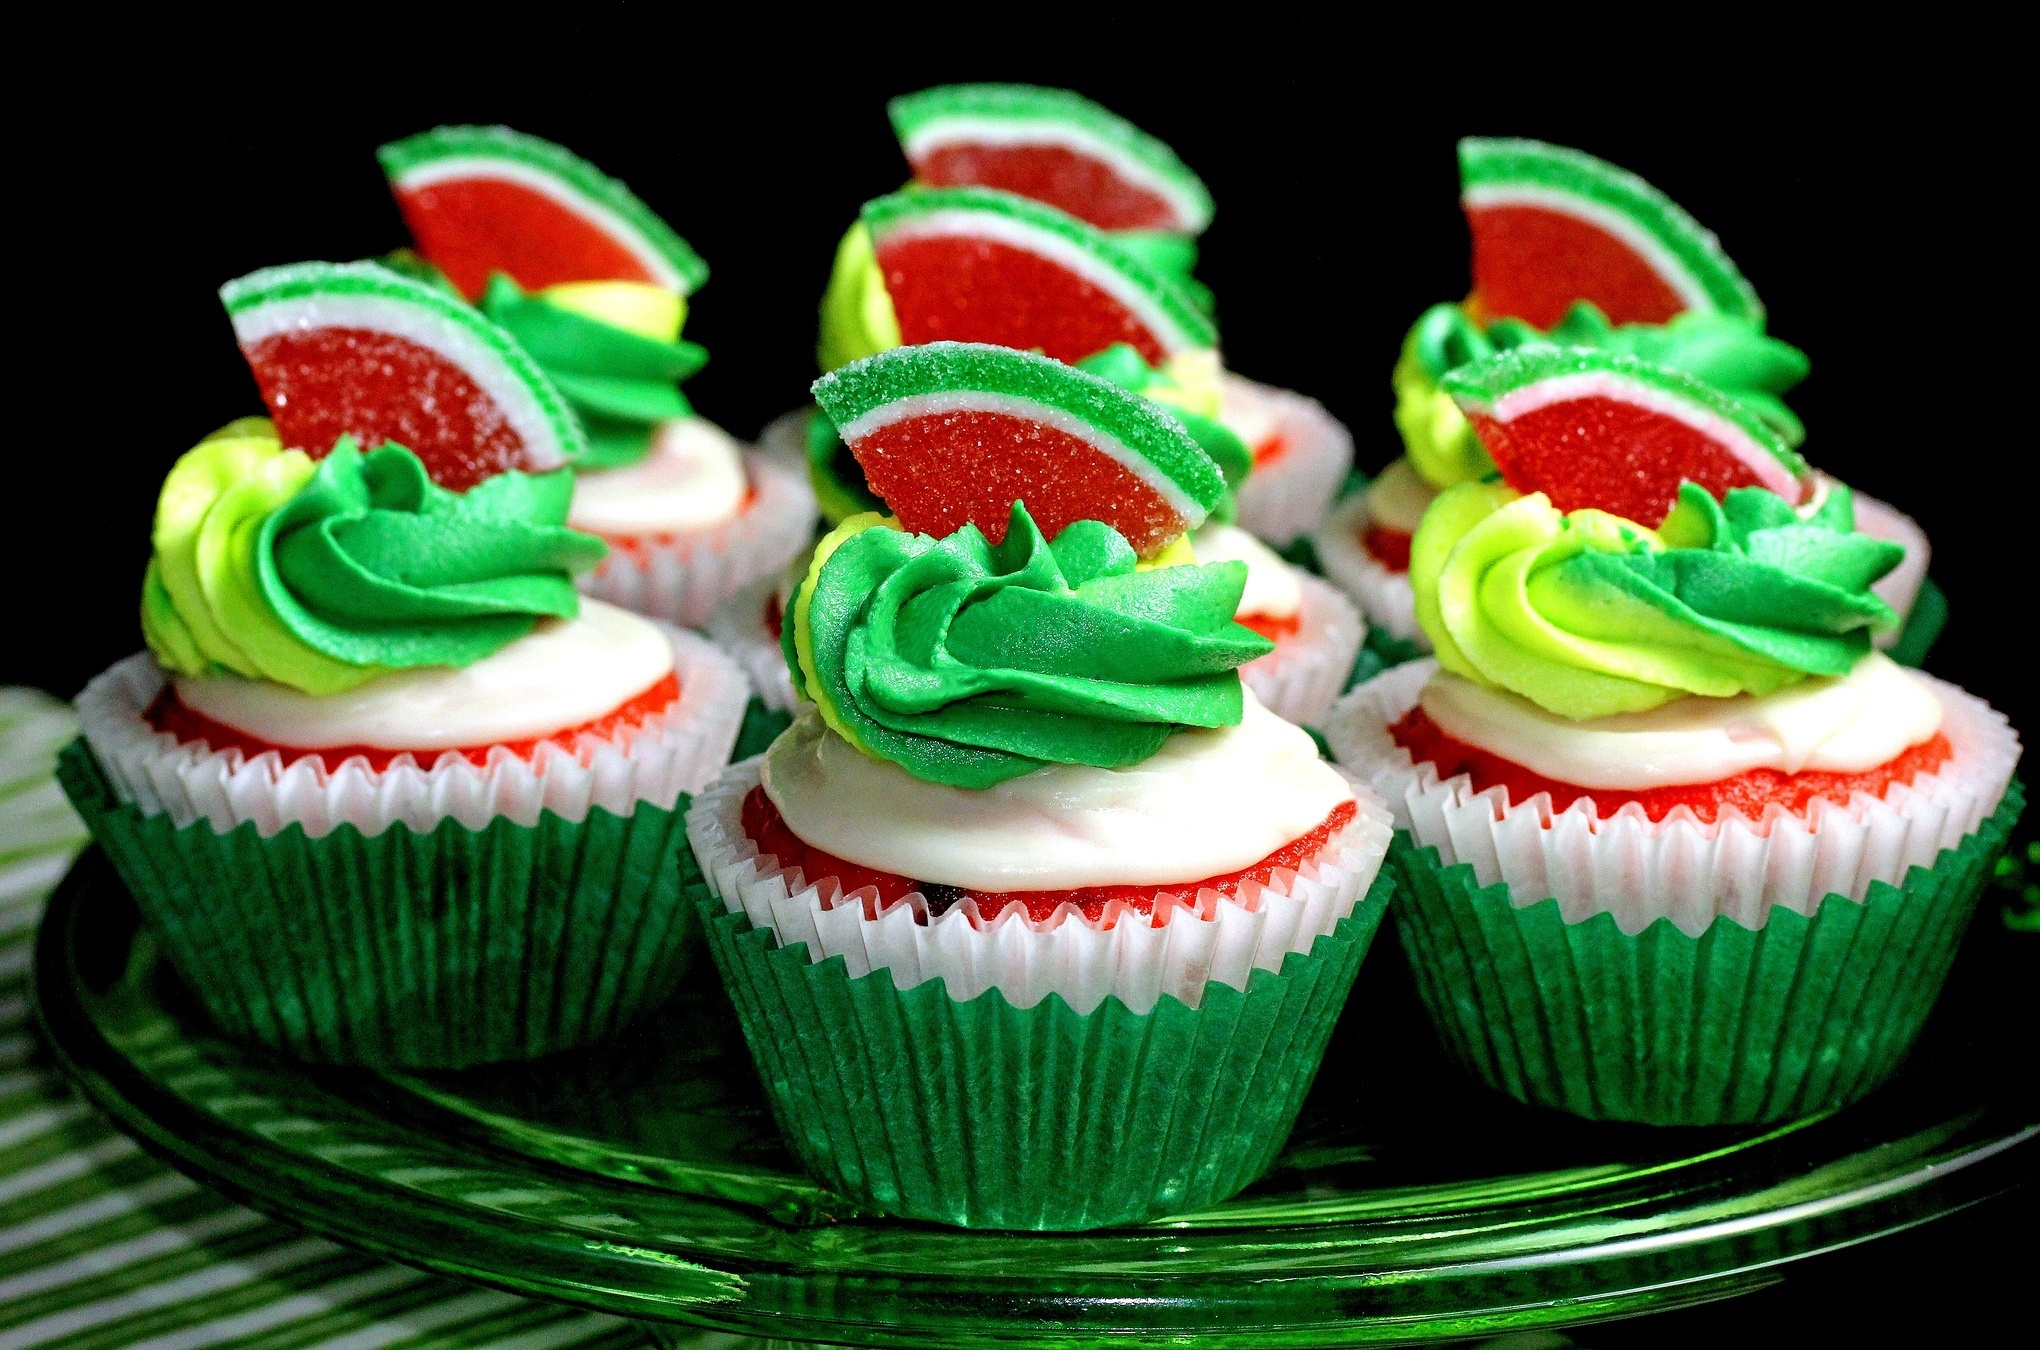 Mouth-watering cupcakes, HD backgrounds, Delectable treats, Sweet indulgence, 2040x1350 HD Desktop